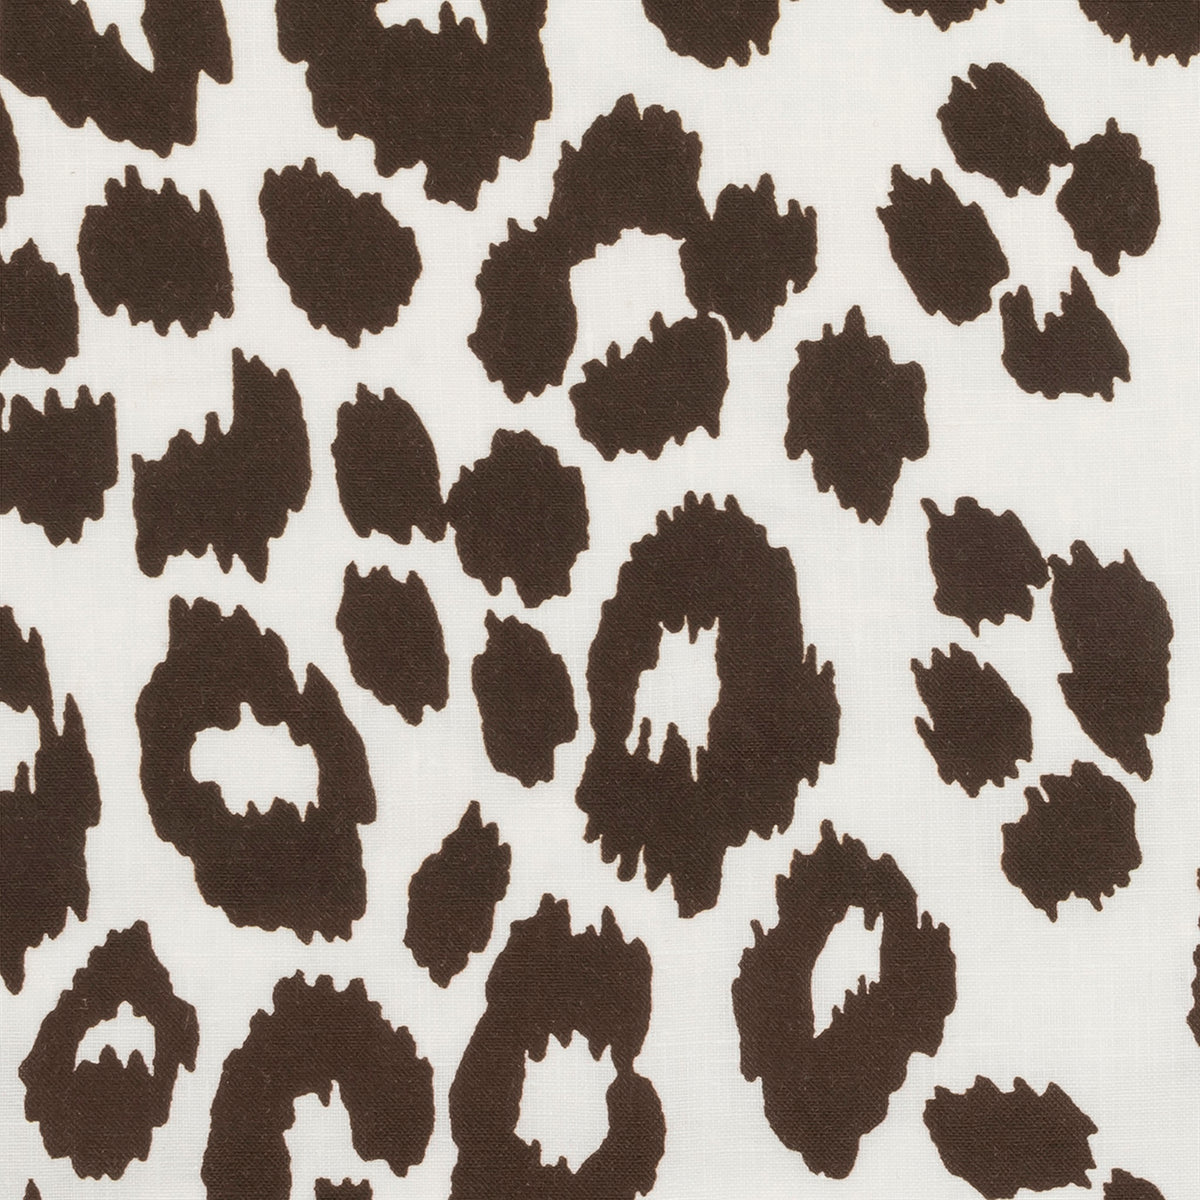 Swatch Sample of Matouk Schumacher Iconic Leopard Table Linens in Color Cinder